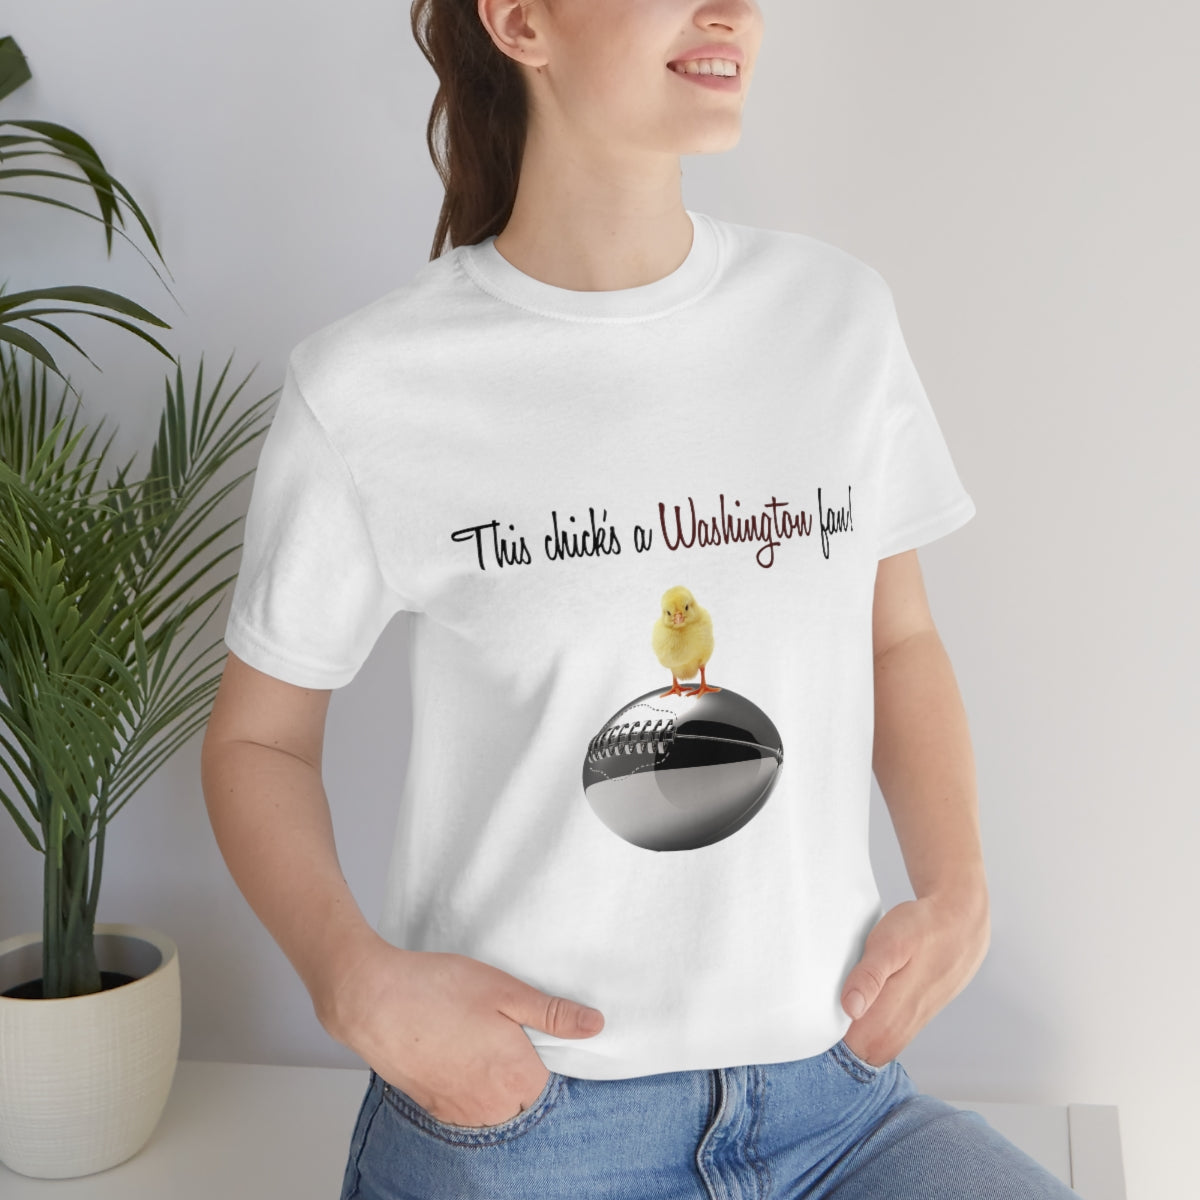 Washington Football T-Shirt - This Chick's A Washington Fan! - Football Fan Shirt - Unisex Fit from Art and Soule